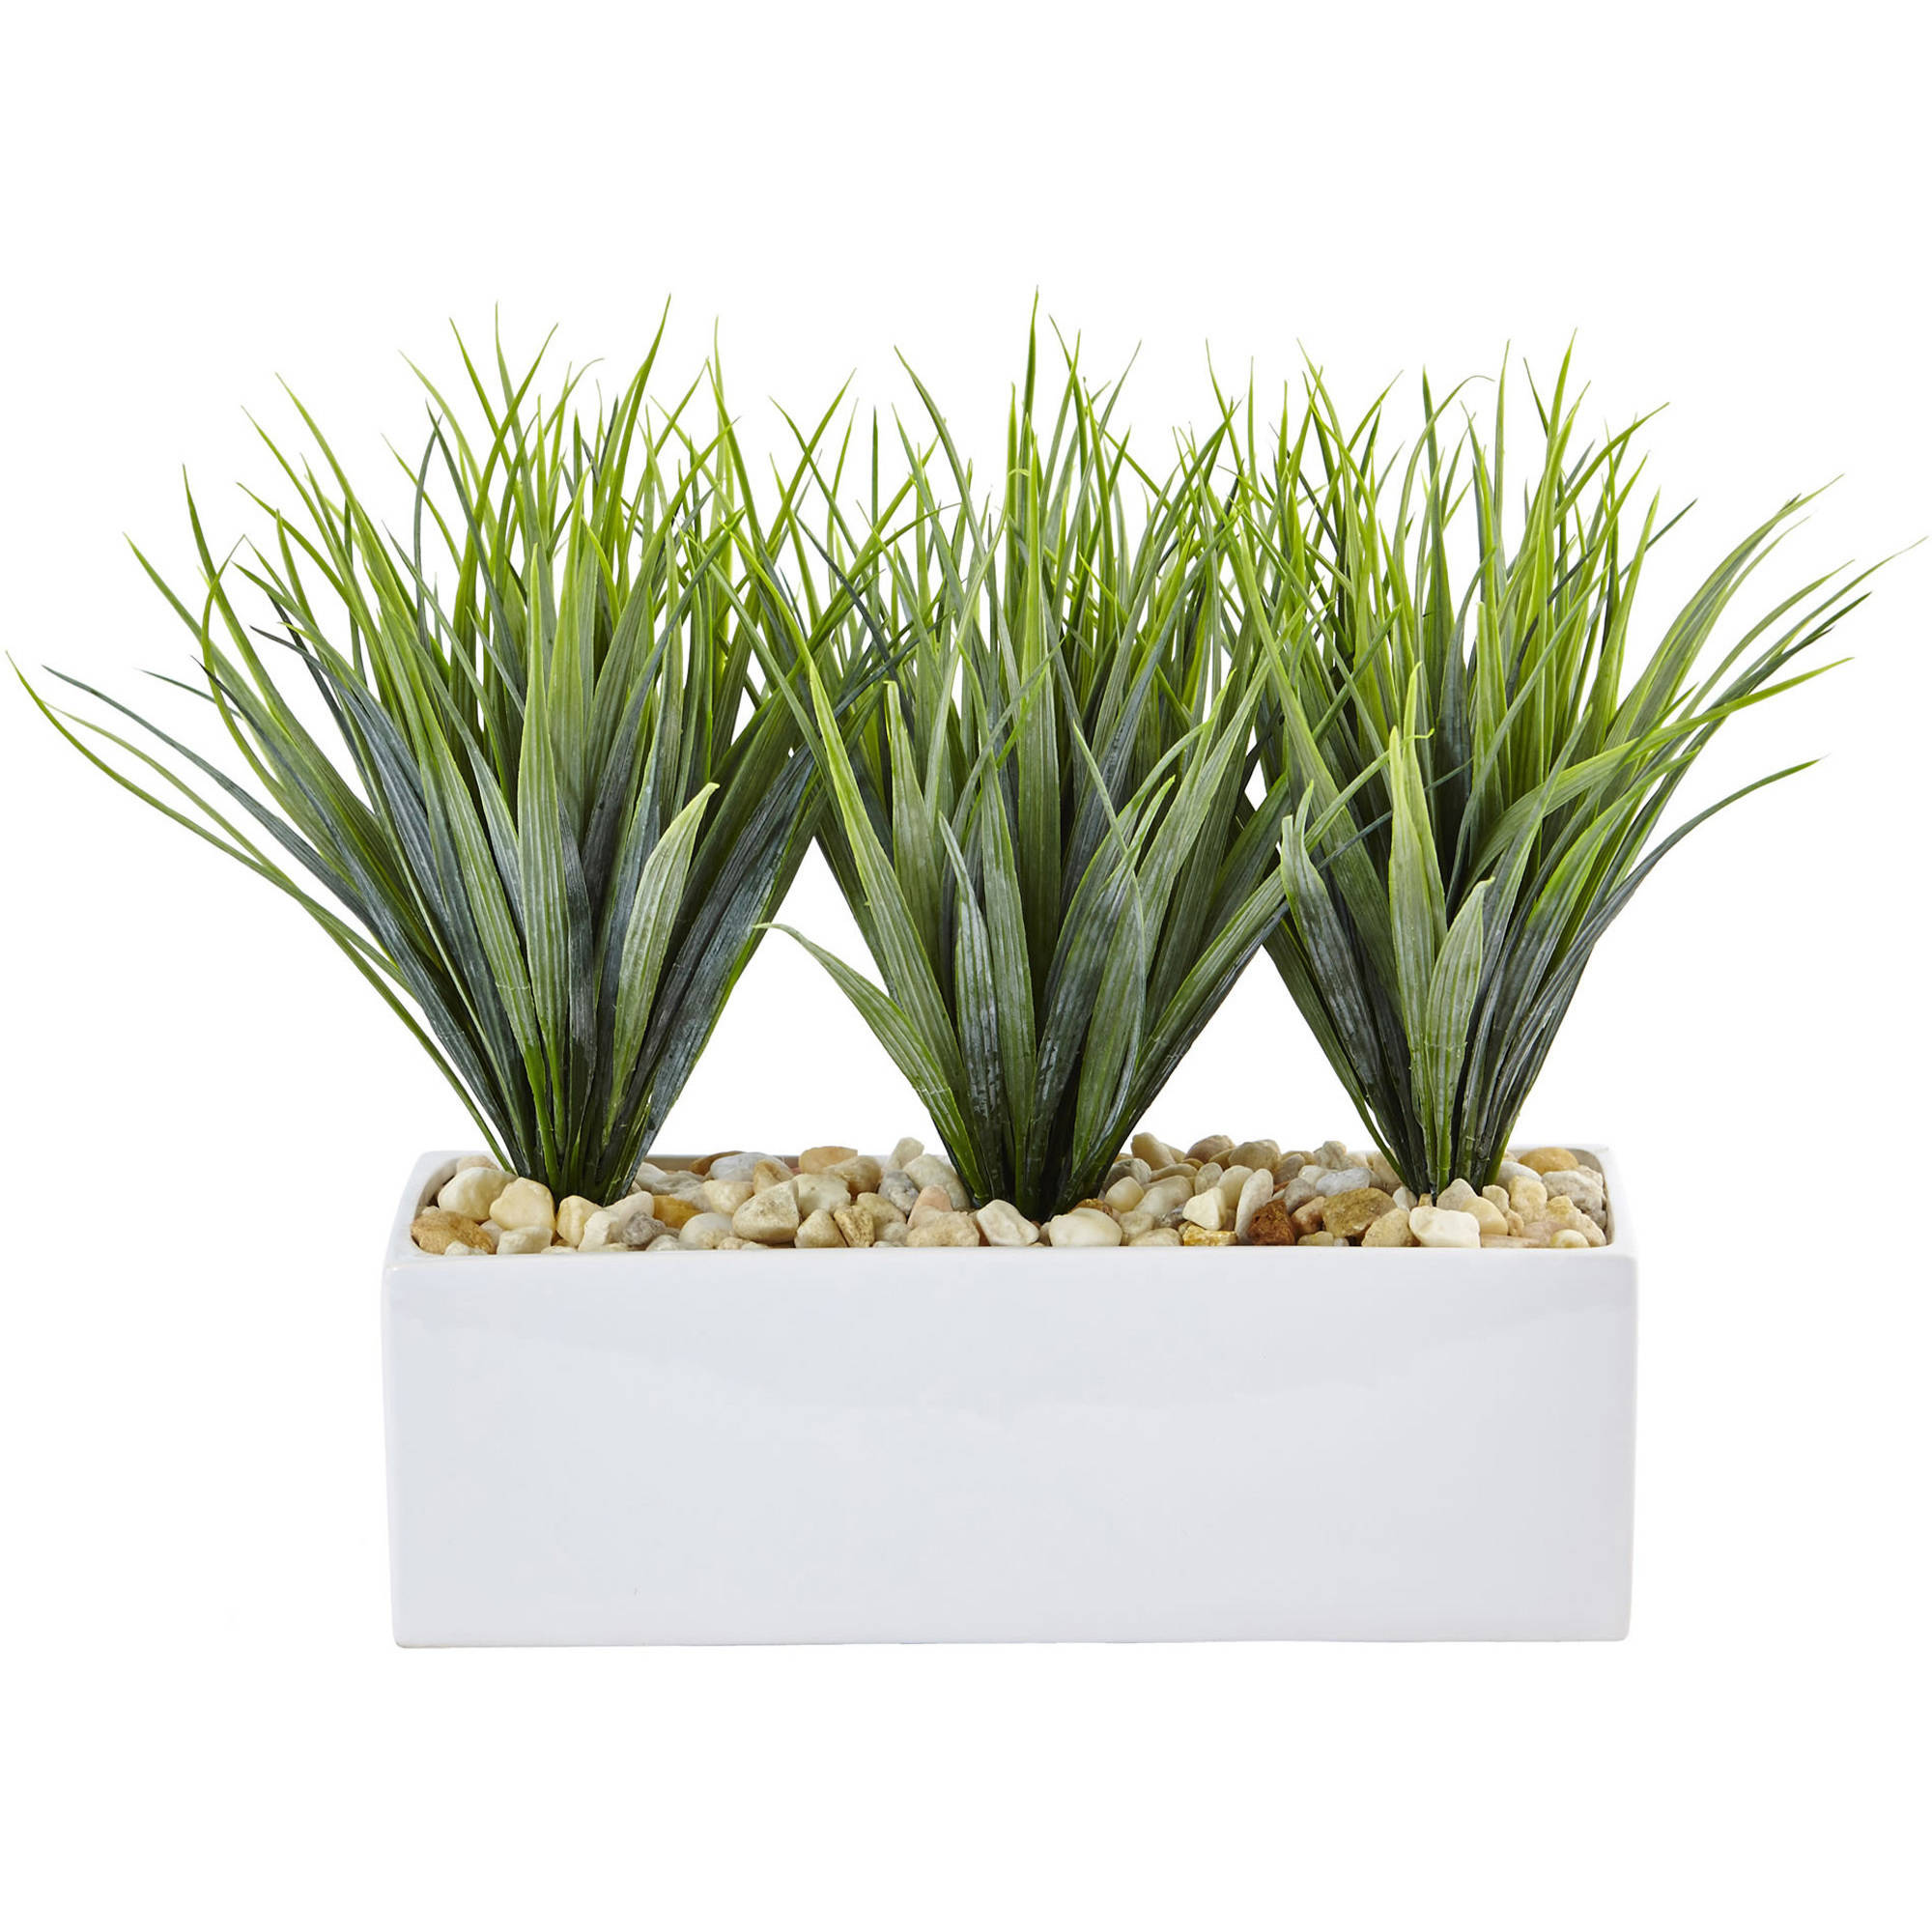 Nearly Natural Green 17"W x 8"D Vanilla Grass in a White Rectangular Planter - image 1 of 4